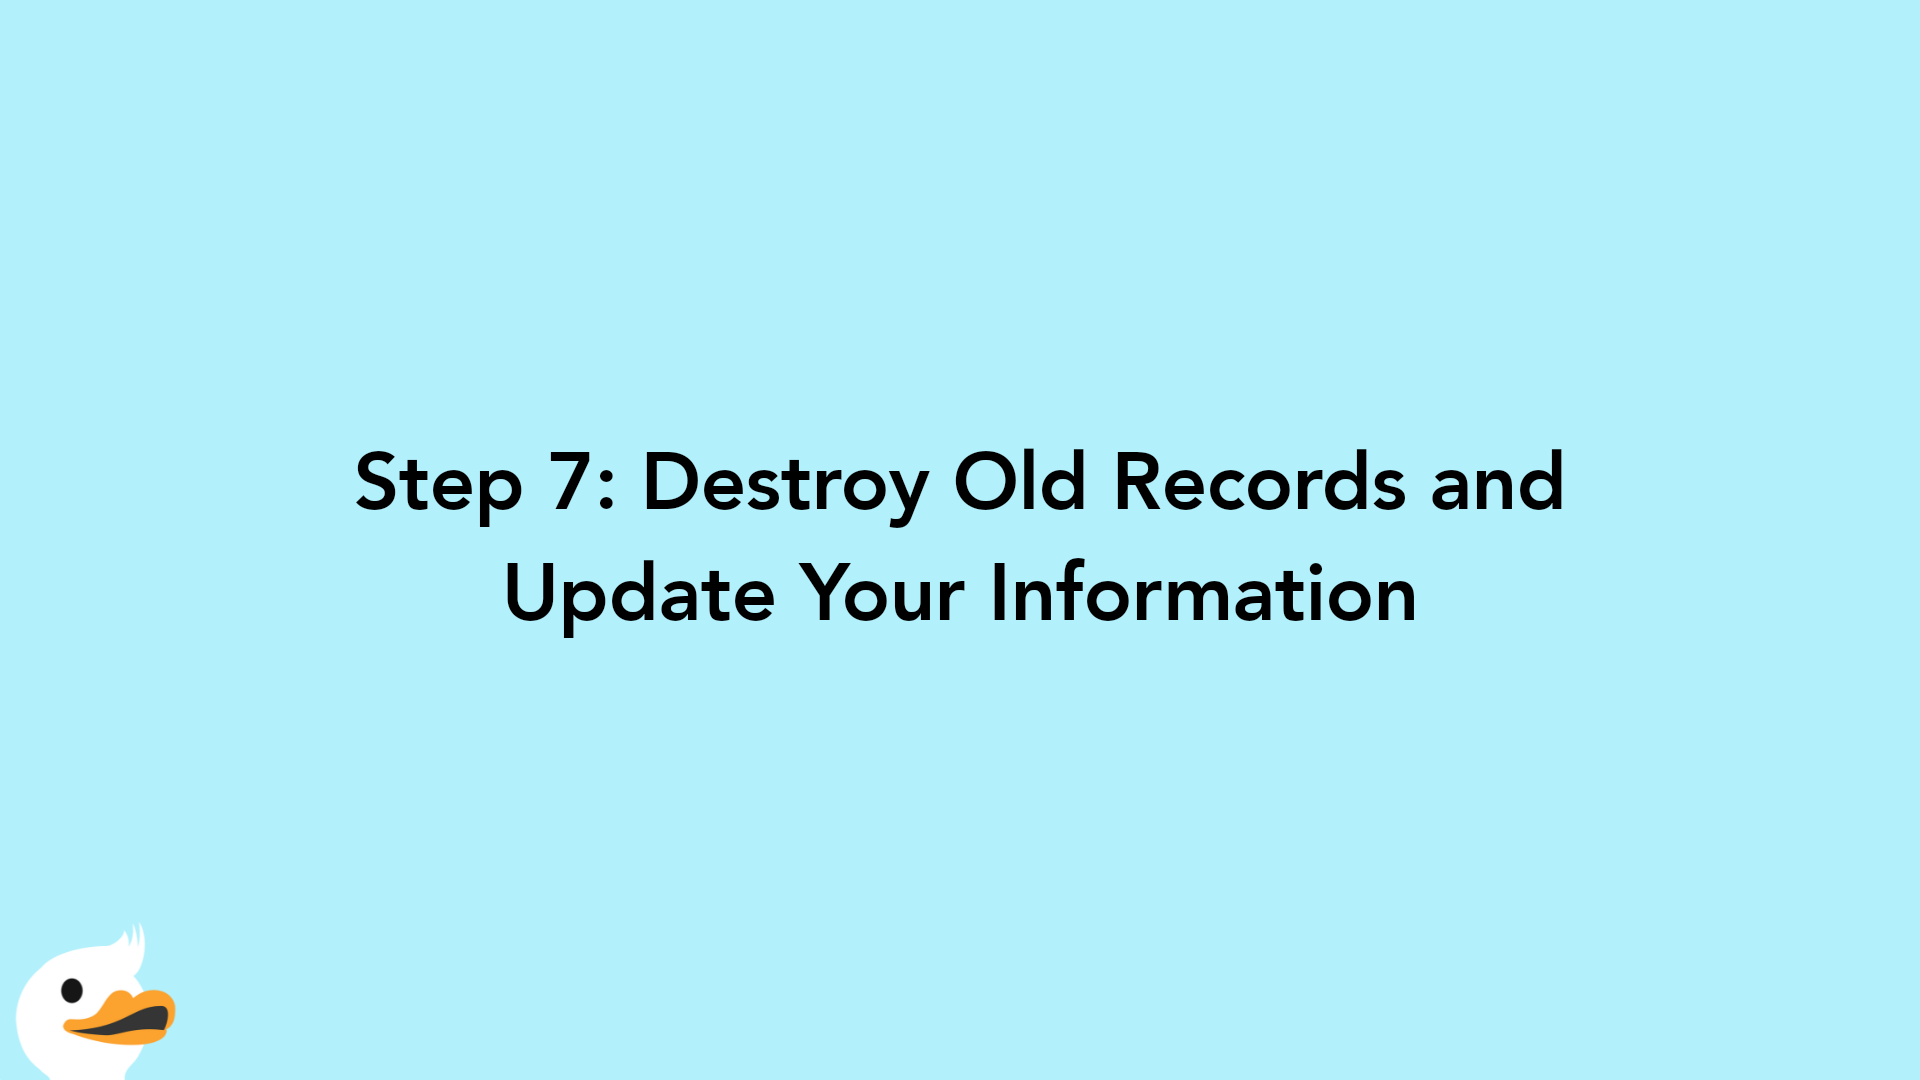 Step 7: Destroy Old Records and Update Your Information